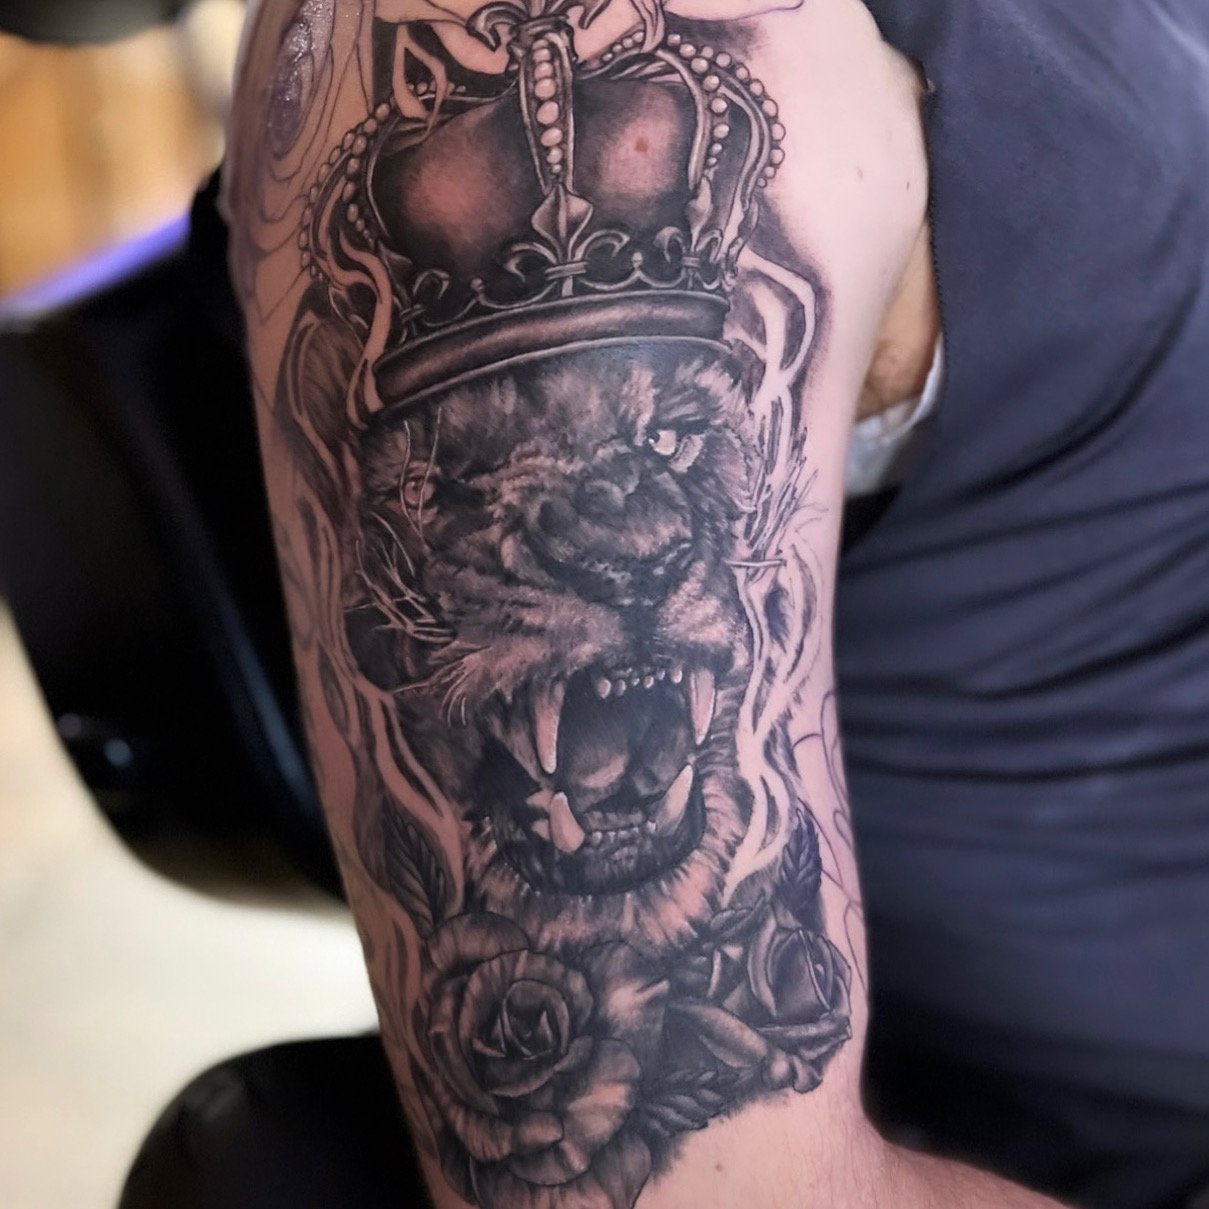 Justin Fleetwood — The Bearded Lady Tattoo Parlor